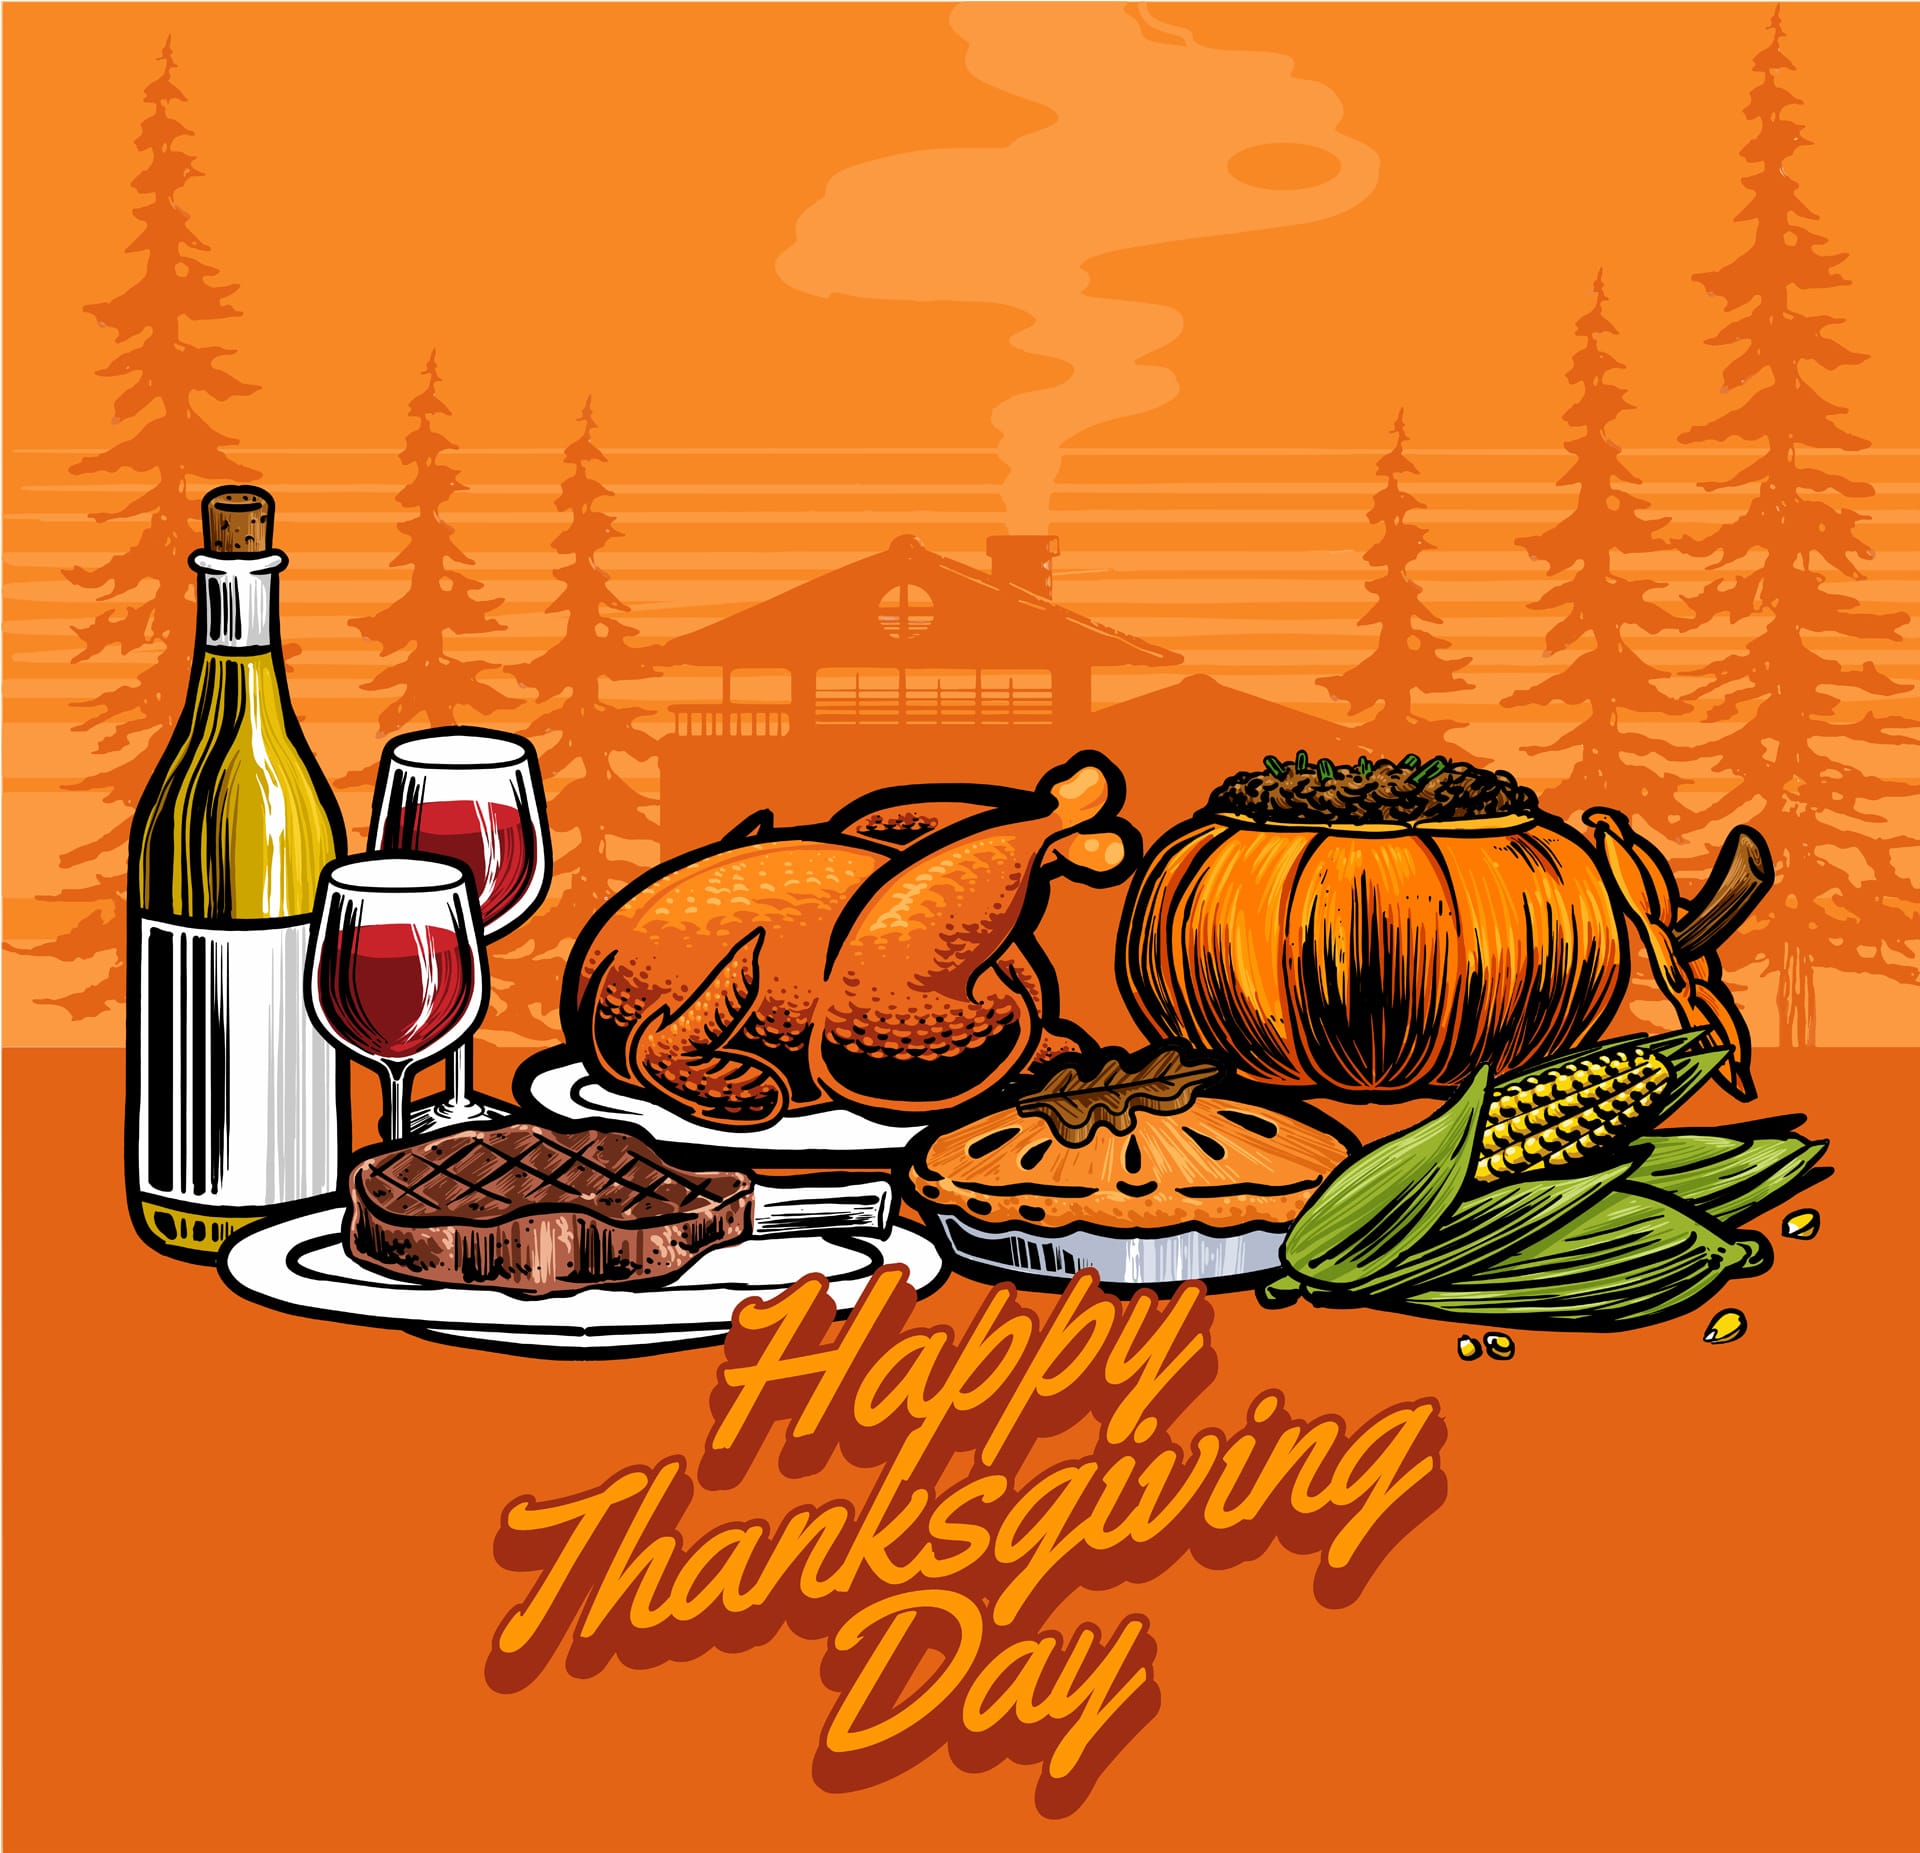 Happy thanksgiving day foods illustration happy thanksgiving images